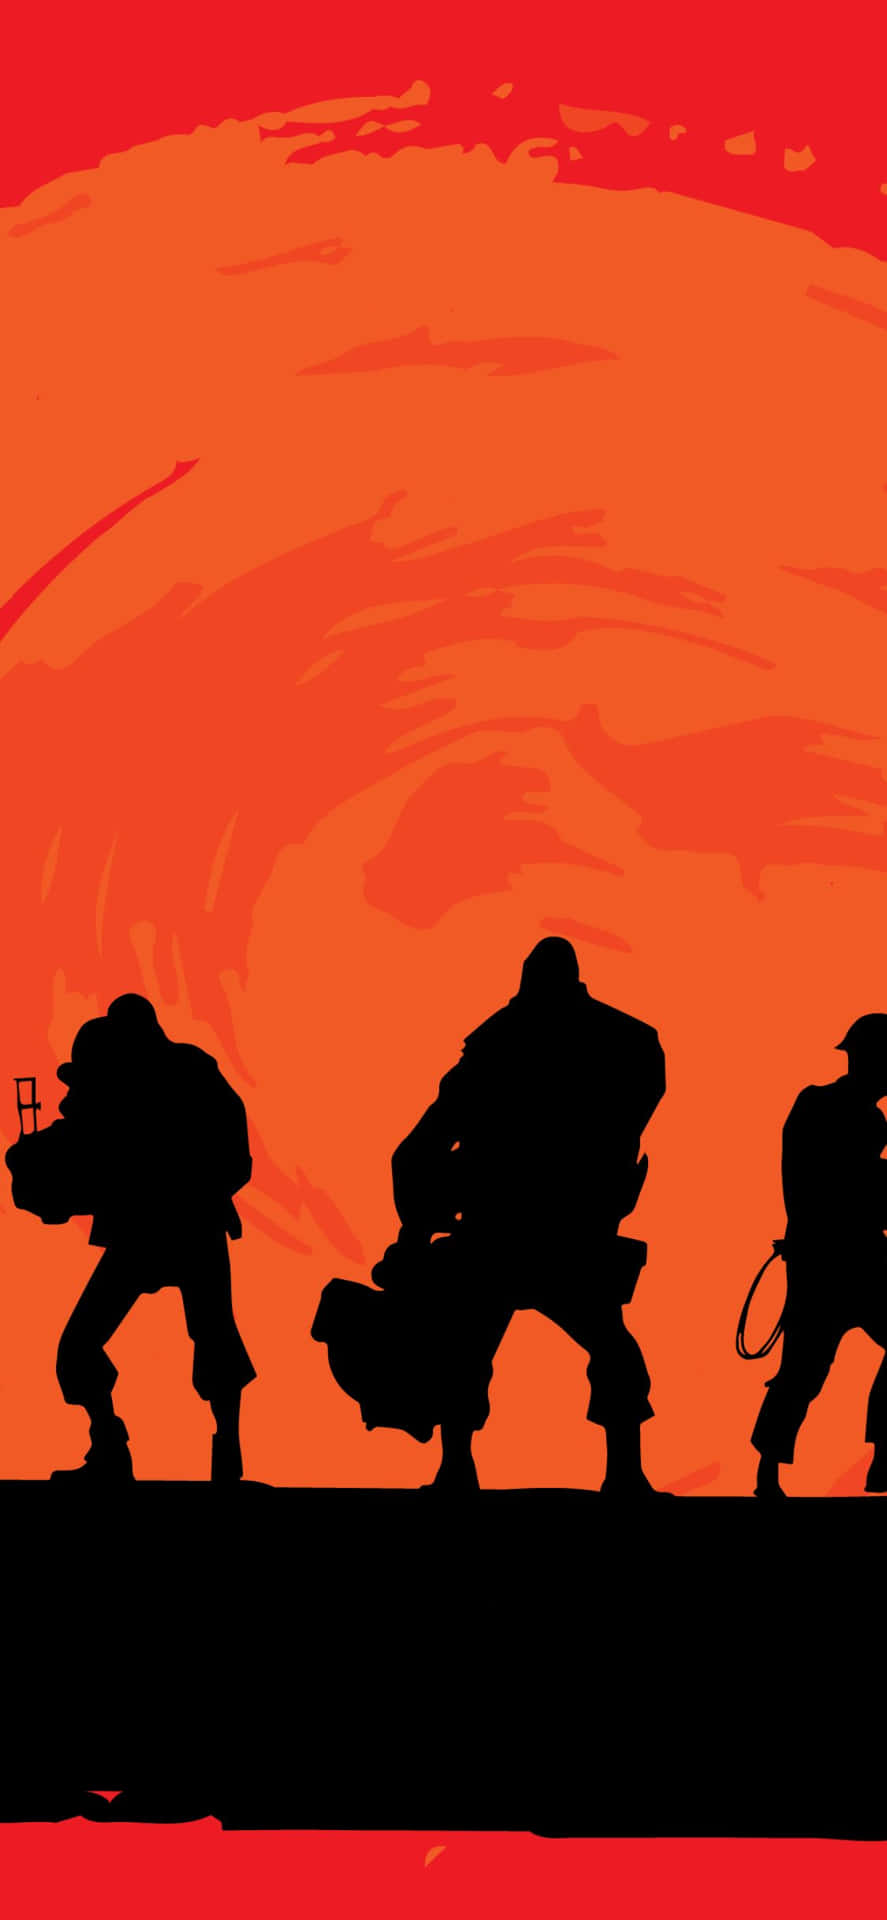 iPhone XS Team Fortress 2 Silhouette Illustration Background